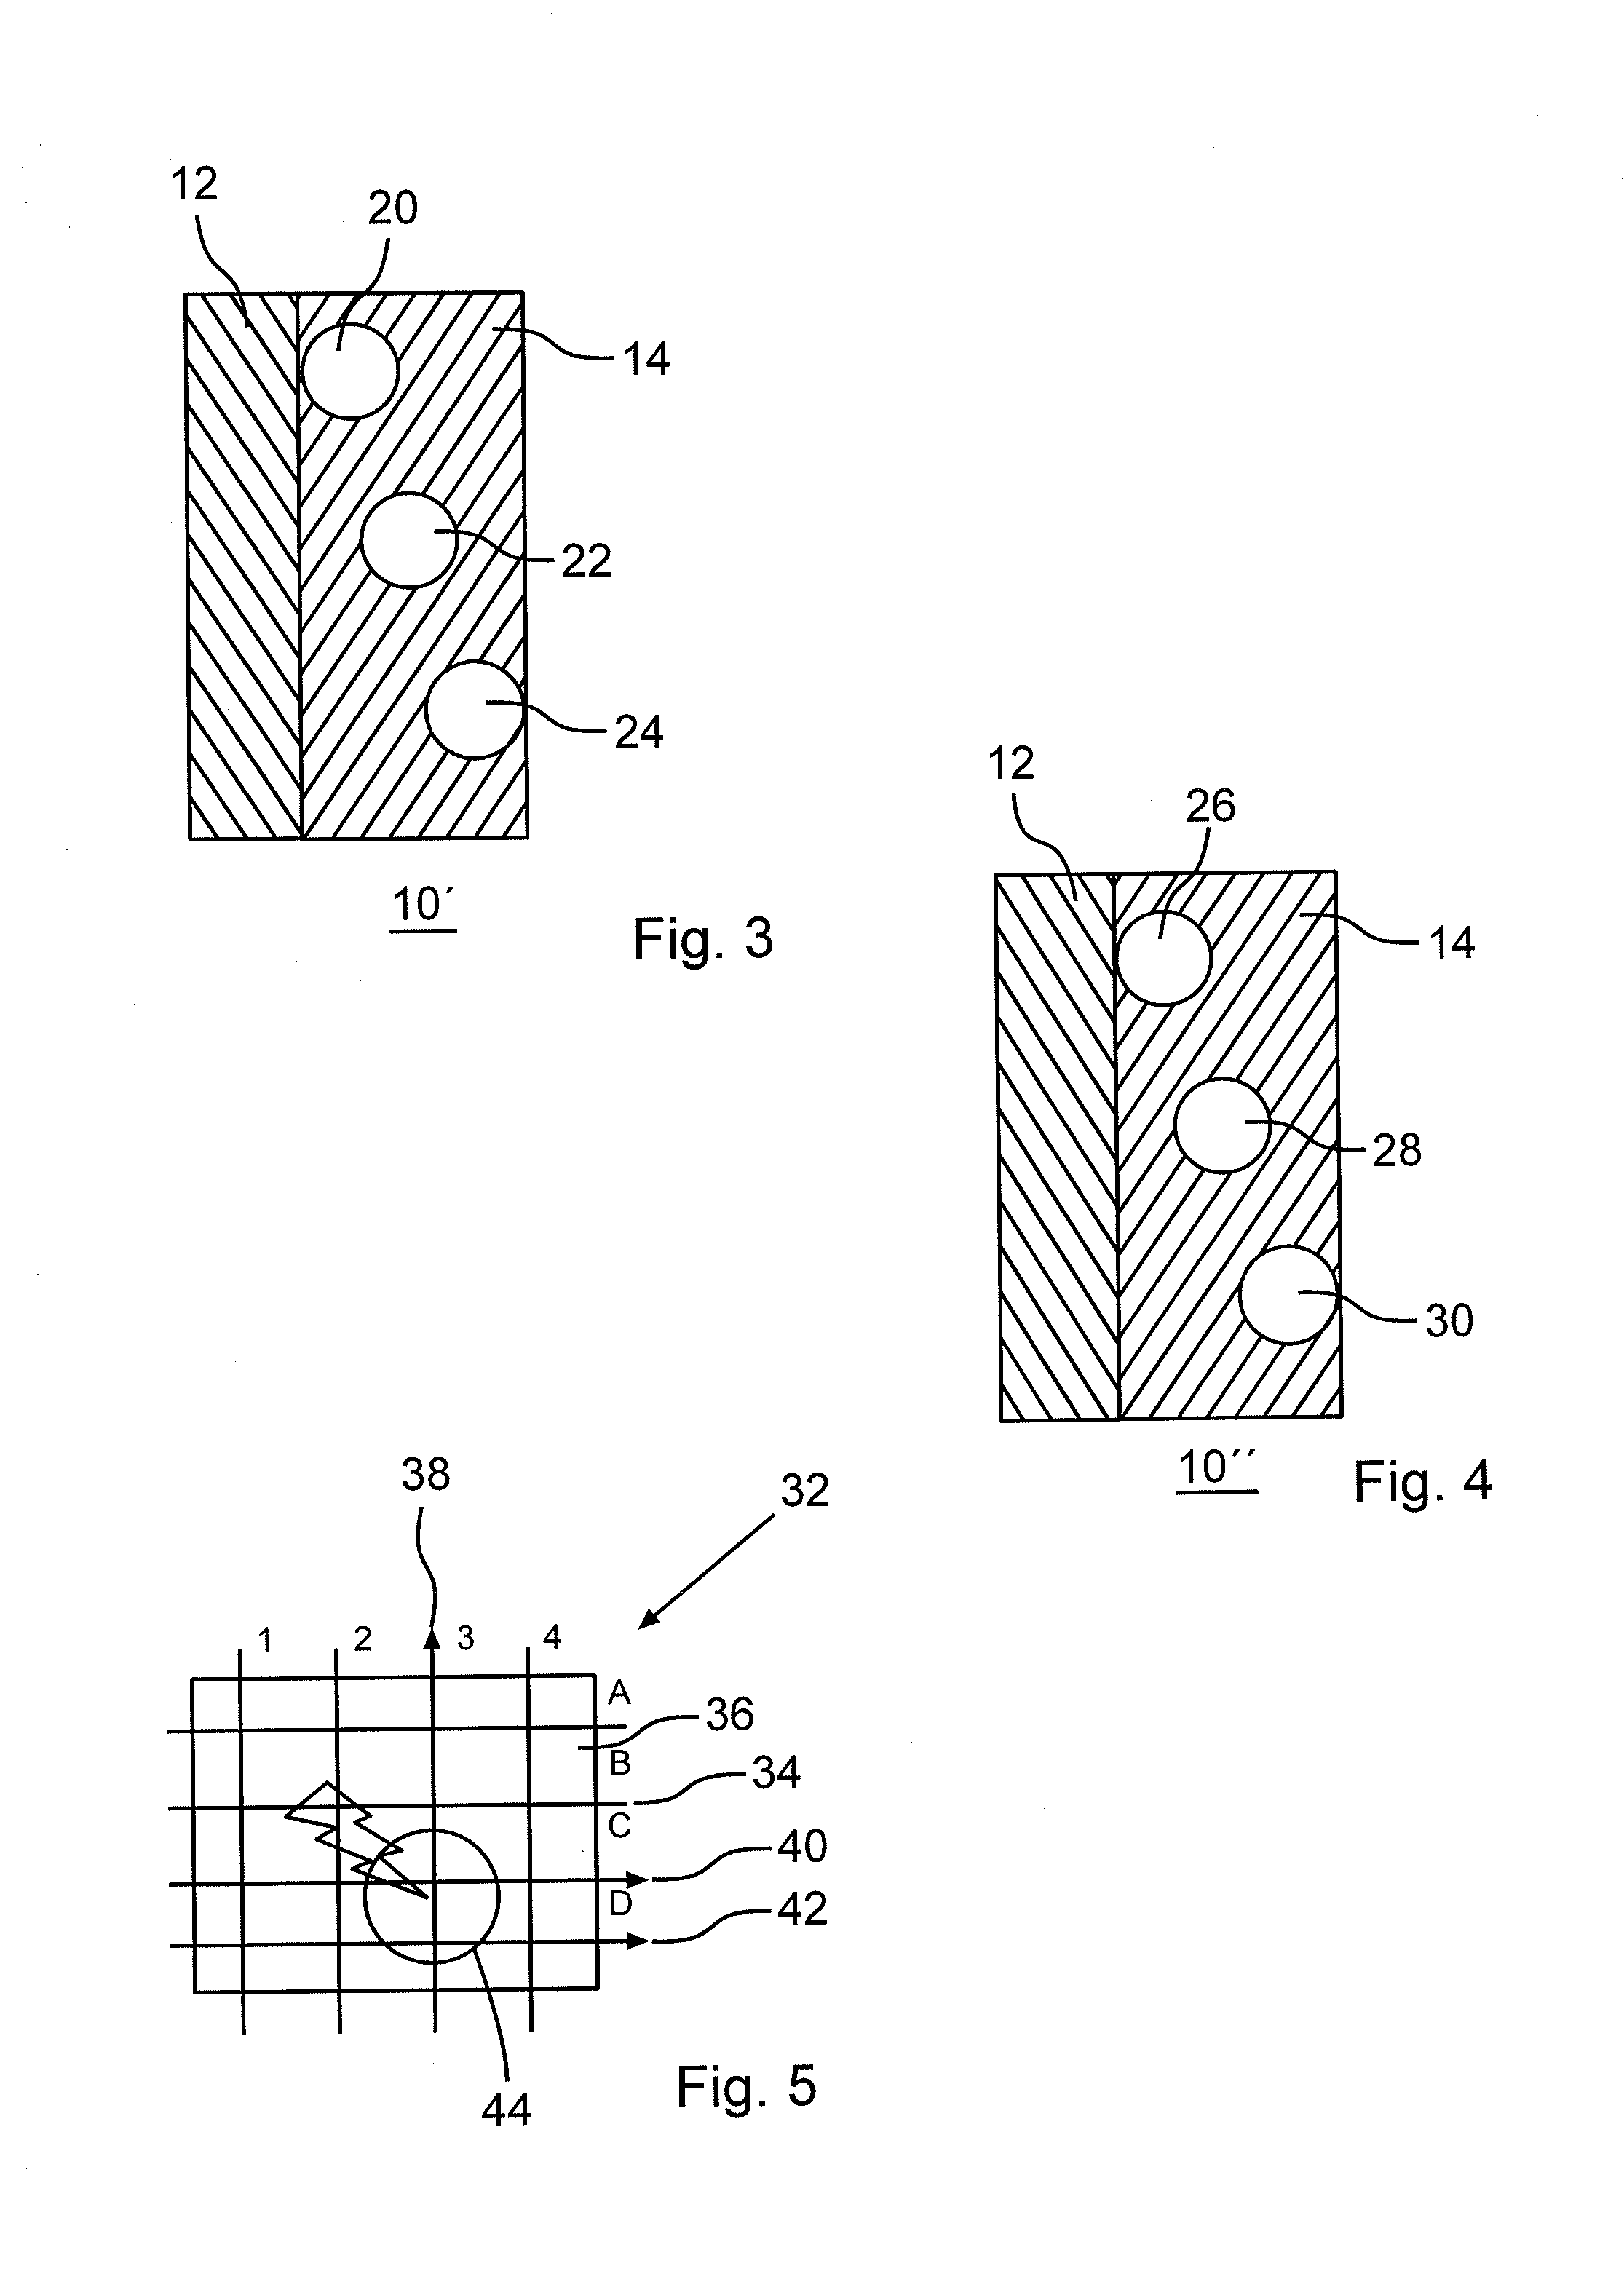 Hybrid component and method for manufacturing a hybrid component